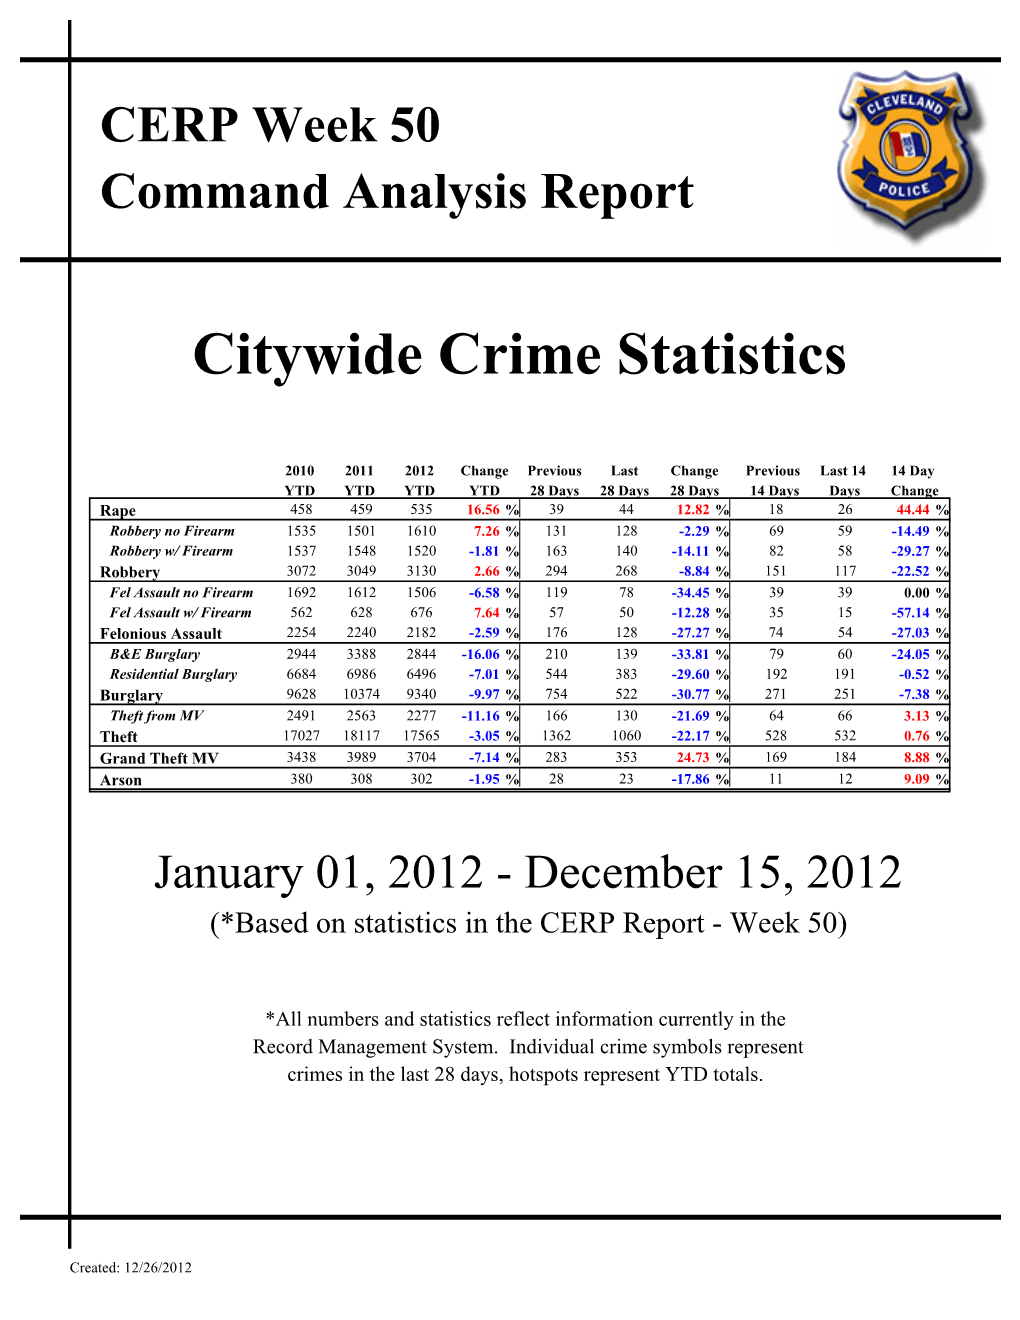 CPD Report Cover Sheet